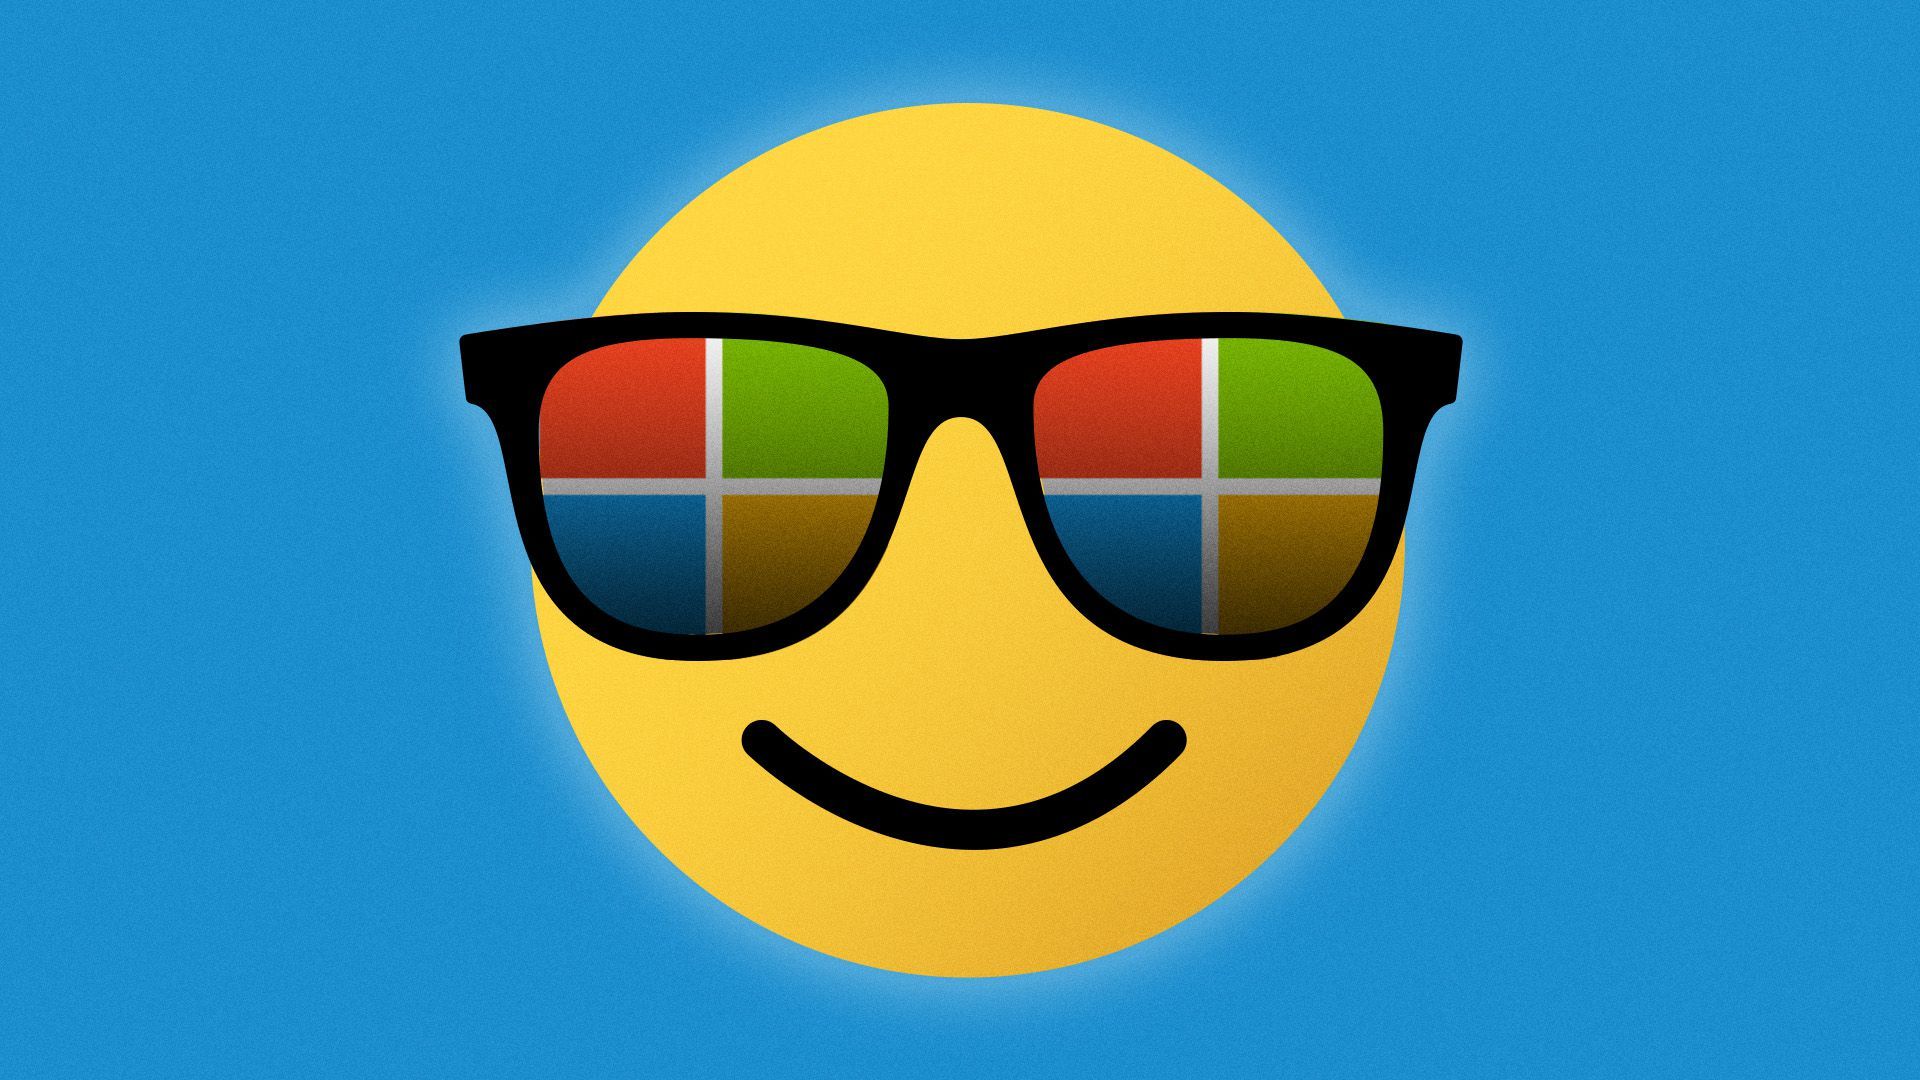 Illustration of the "cool" emoji wearing sunglasses with Microsoft's logo.